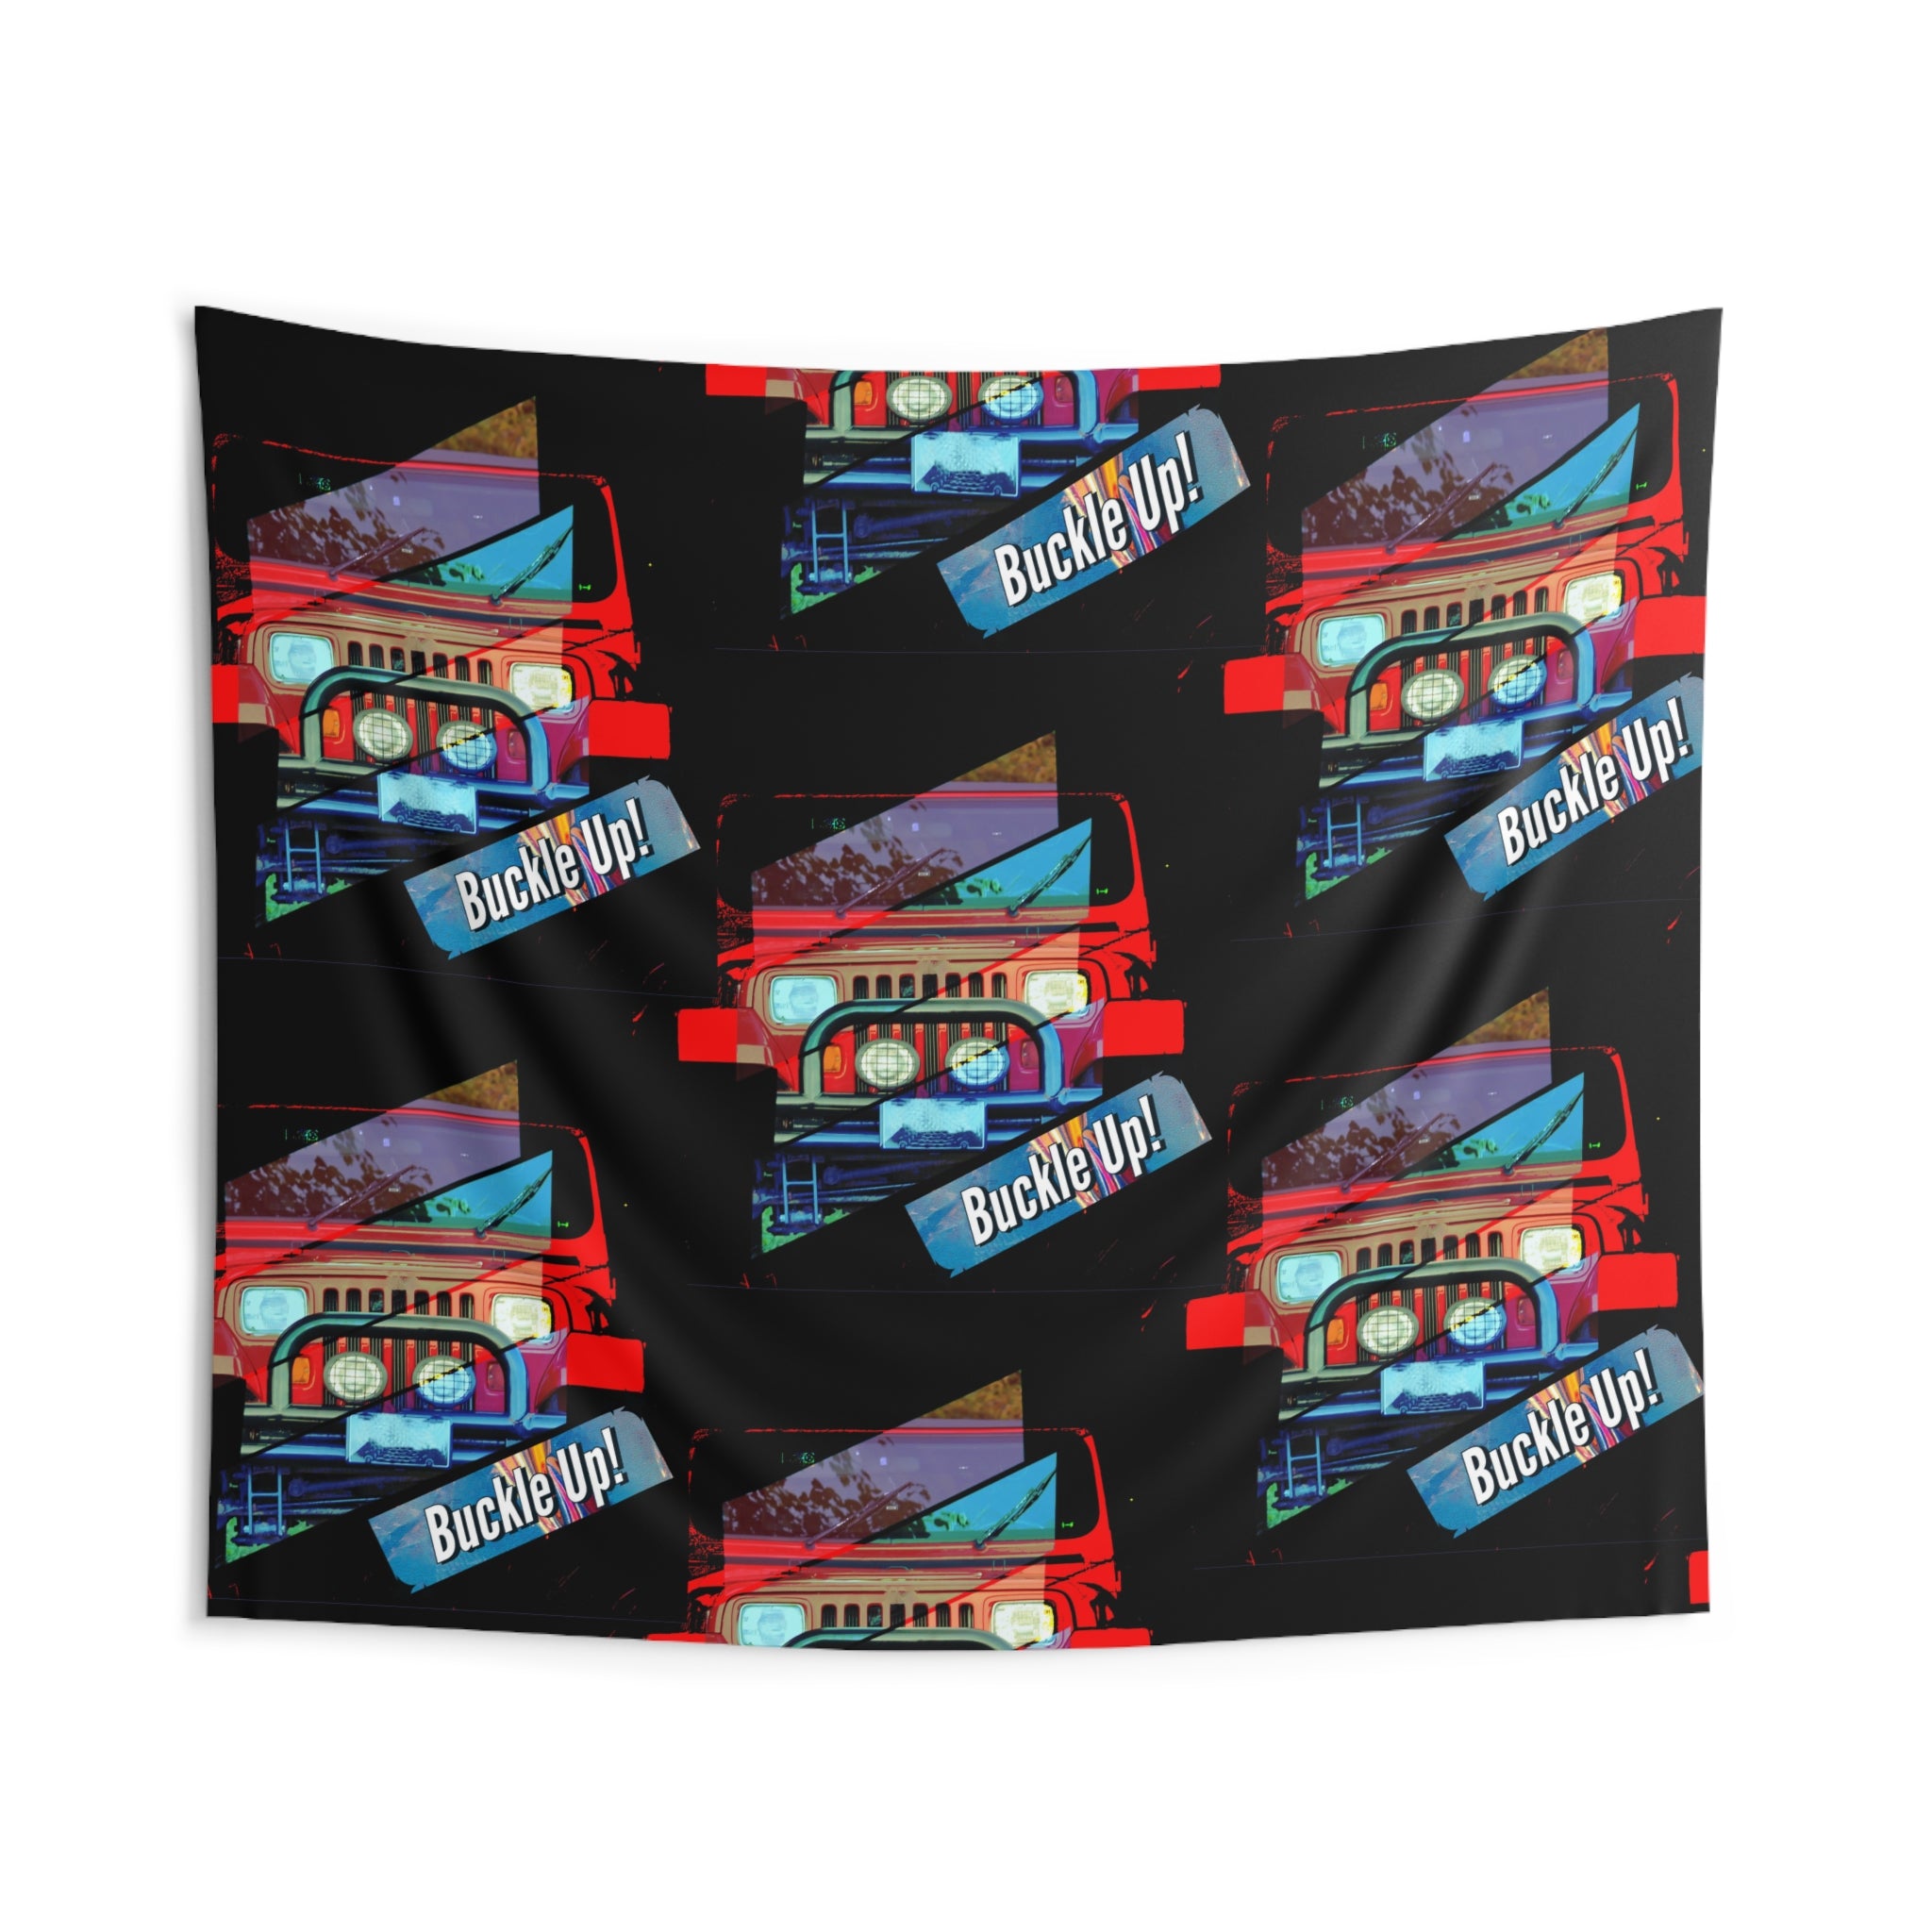 Buckle Up!  Four Wheel Drive Indoor Wall Tapestry - Shell Design Boutique